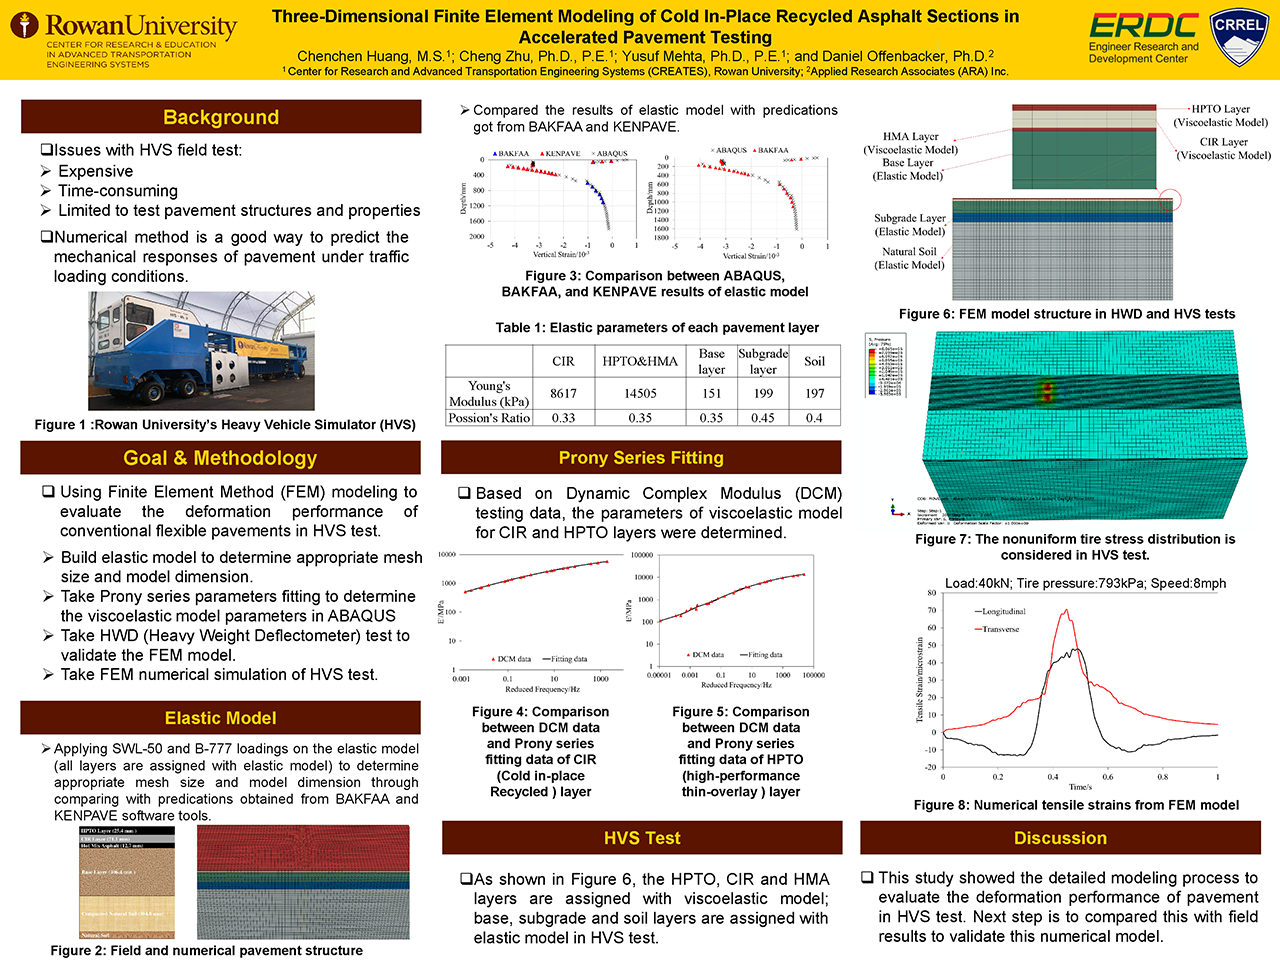 Poster_Three-Dimensional Finite Element Modeling of Cold In-Place Recycled Asphalt Sections in Accelerated Pavement Testing